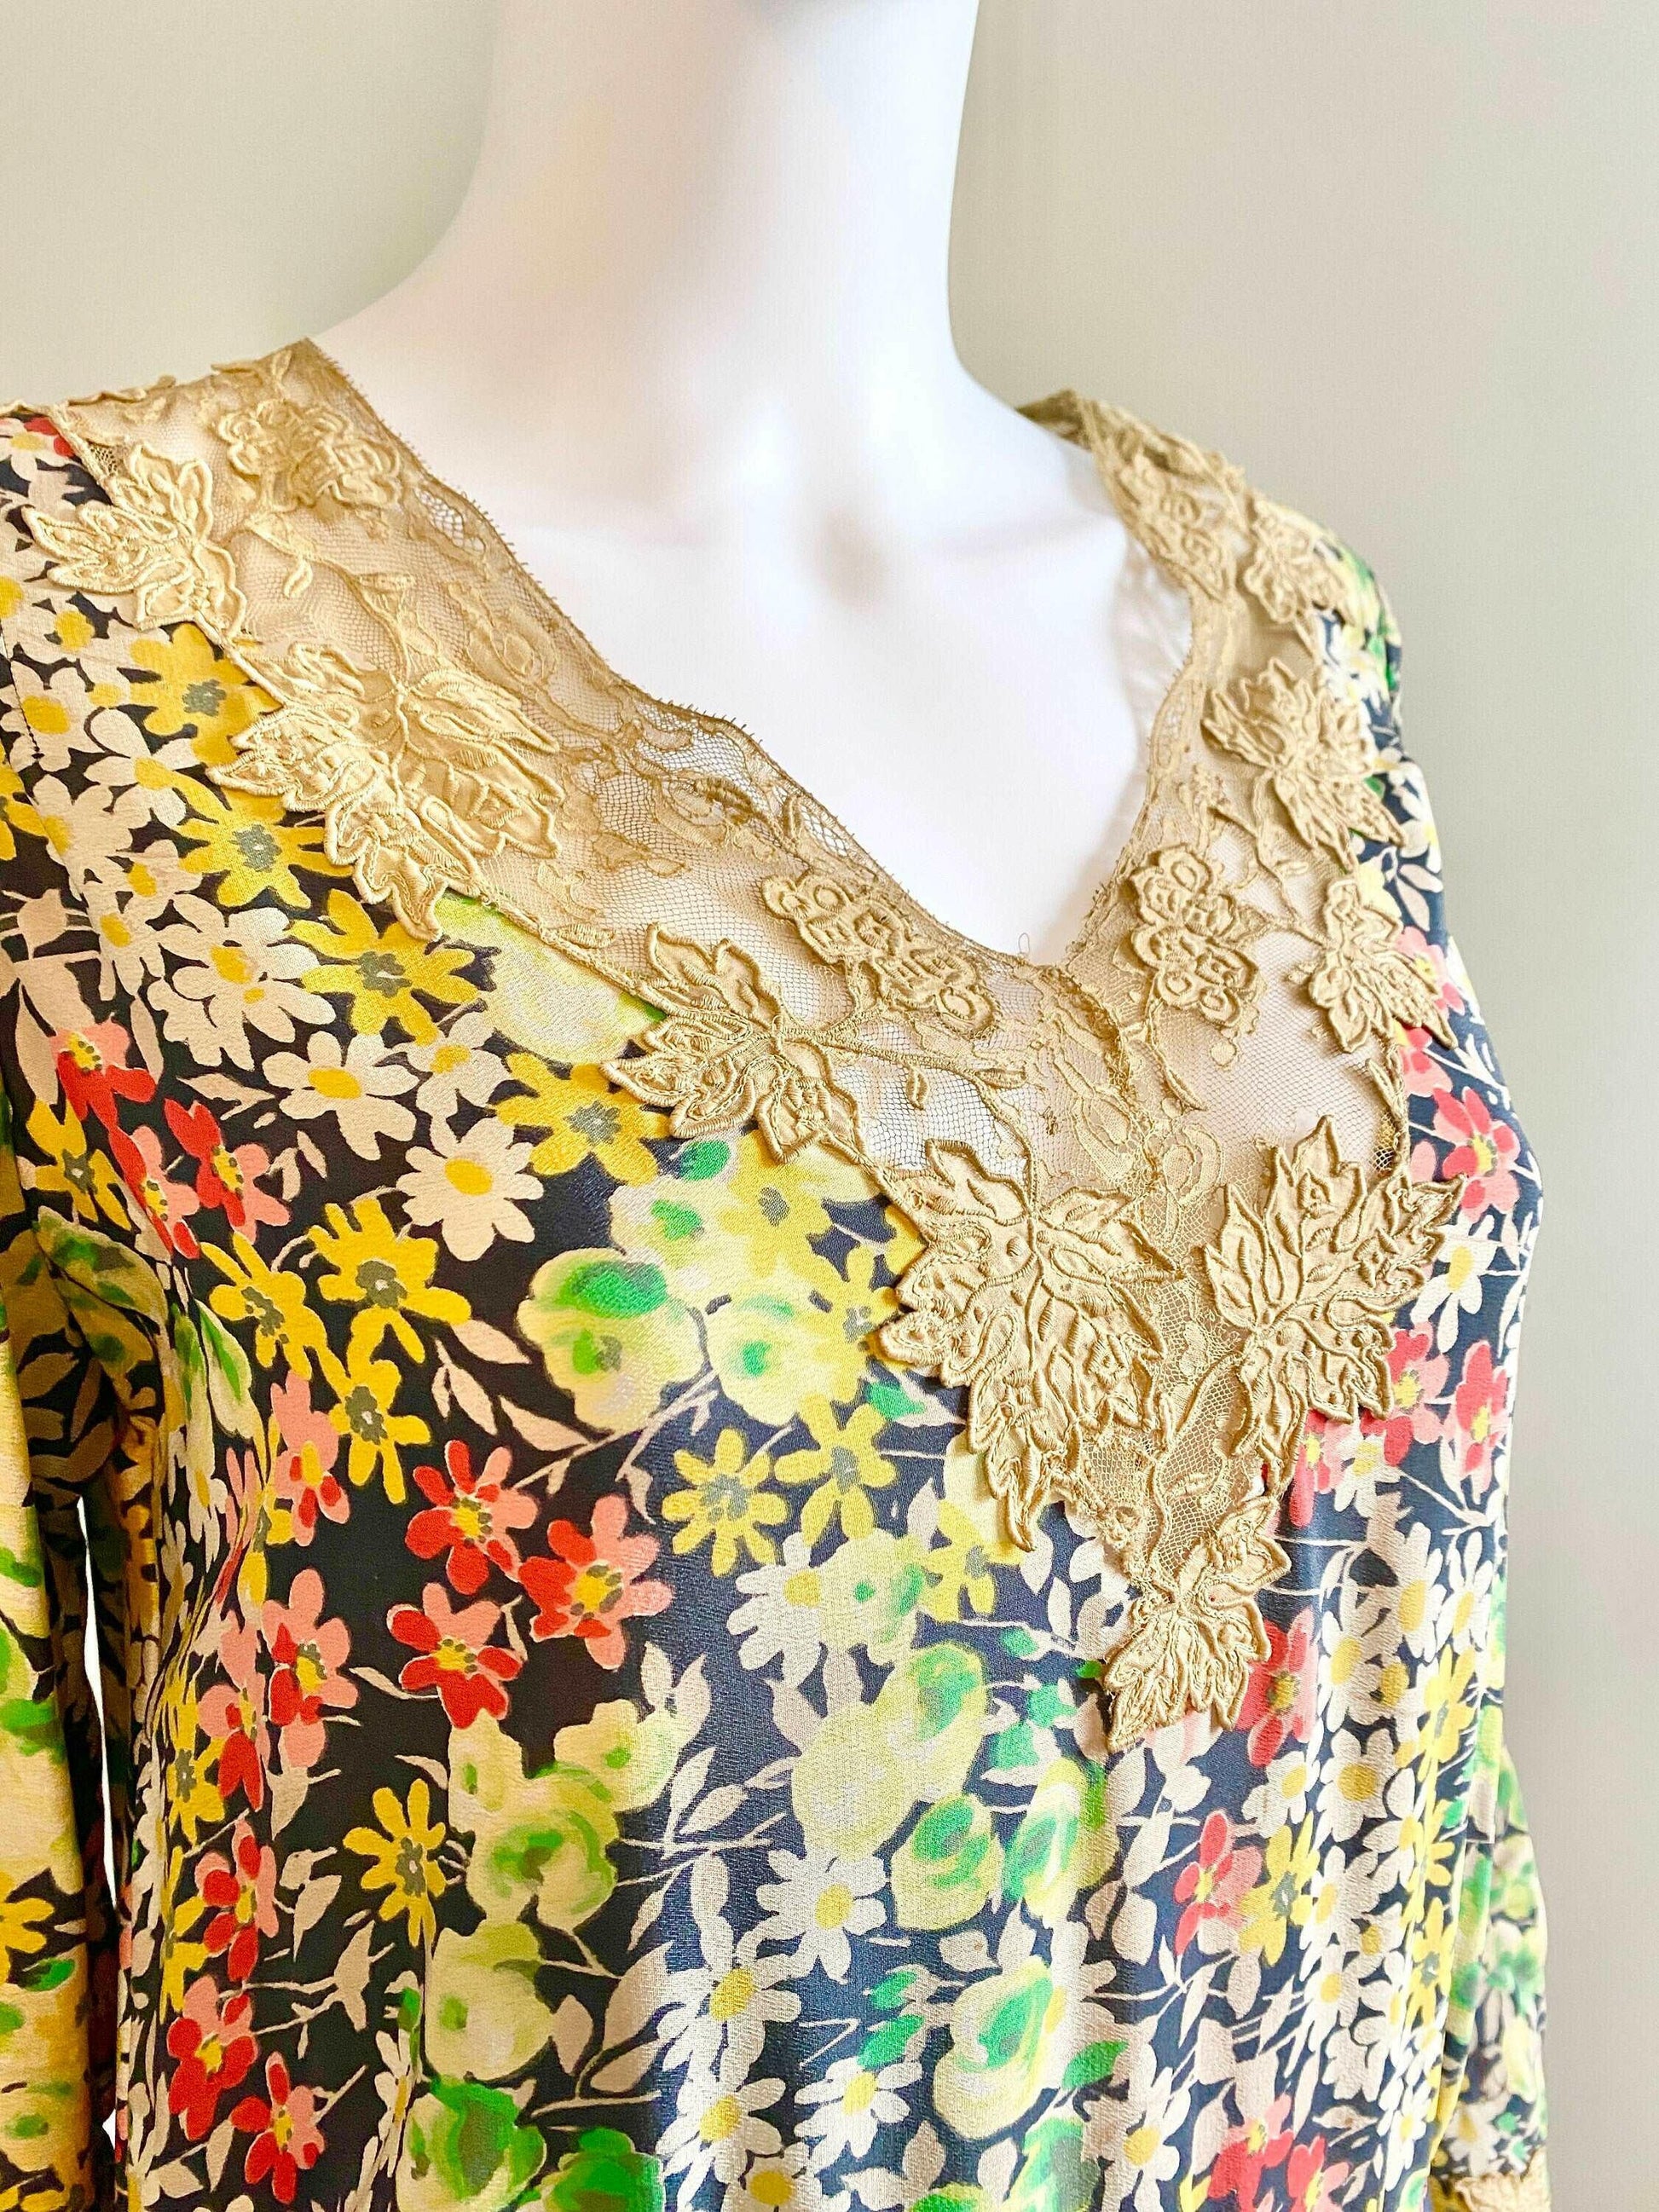 Vintage 1920s Silk Floral Dress / 20s retro day dress with matching purse / Size S